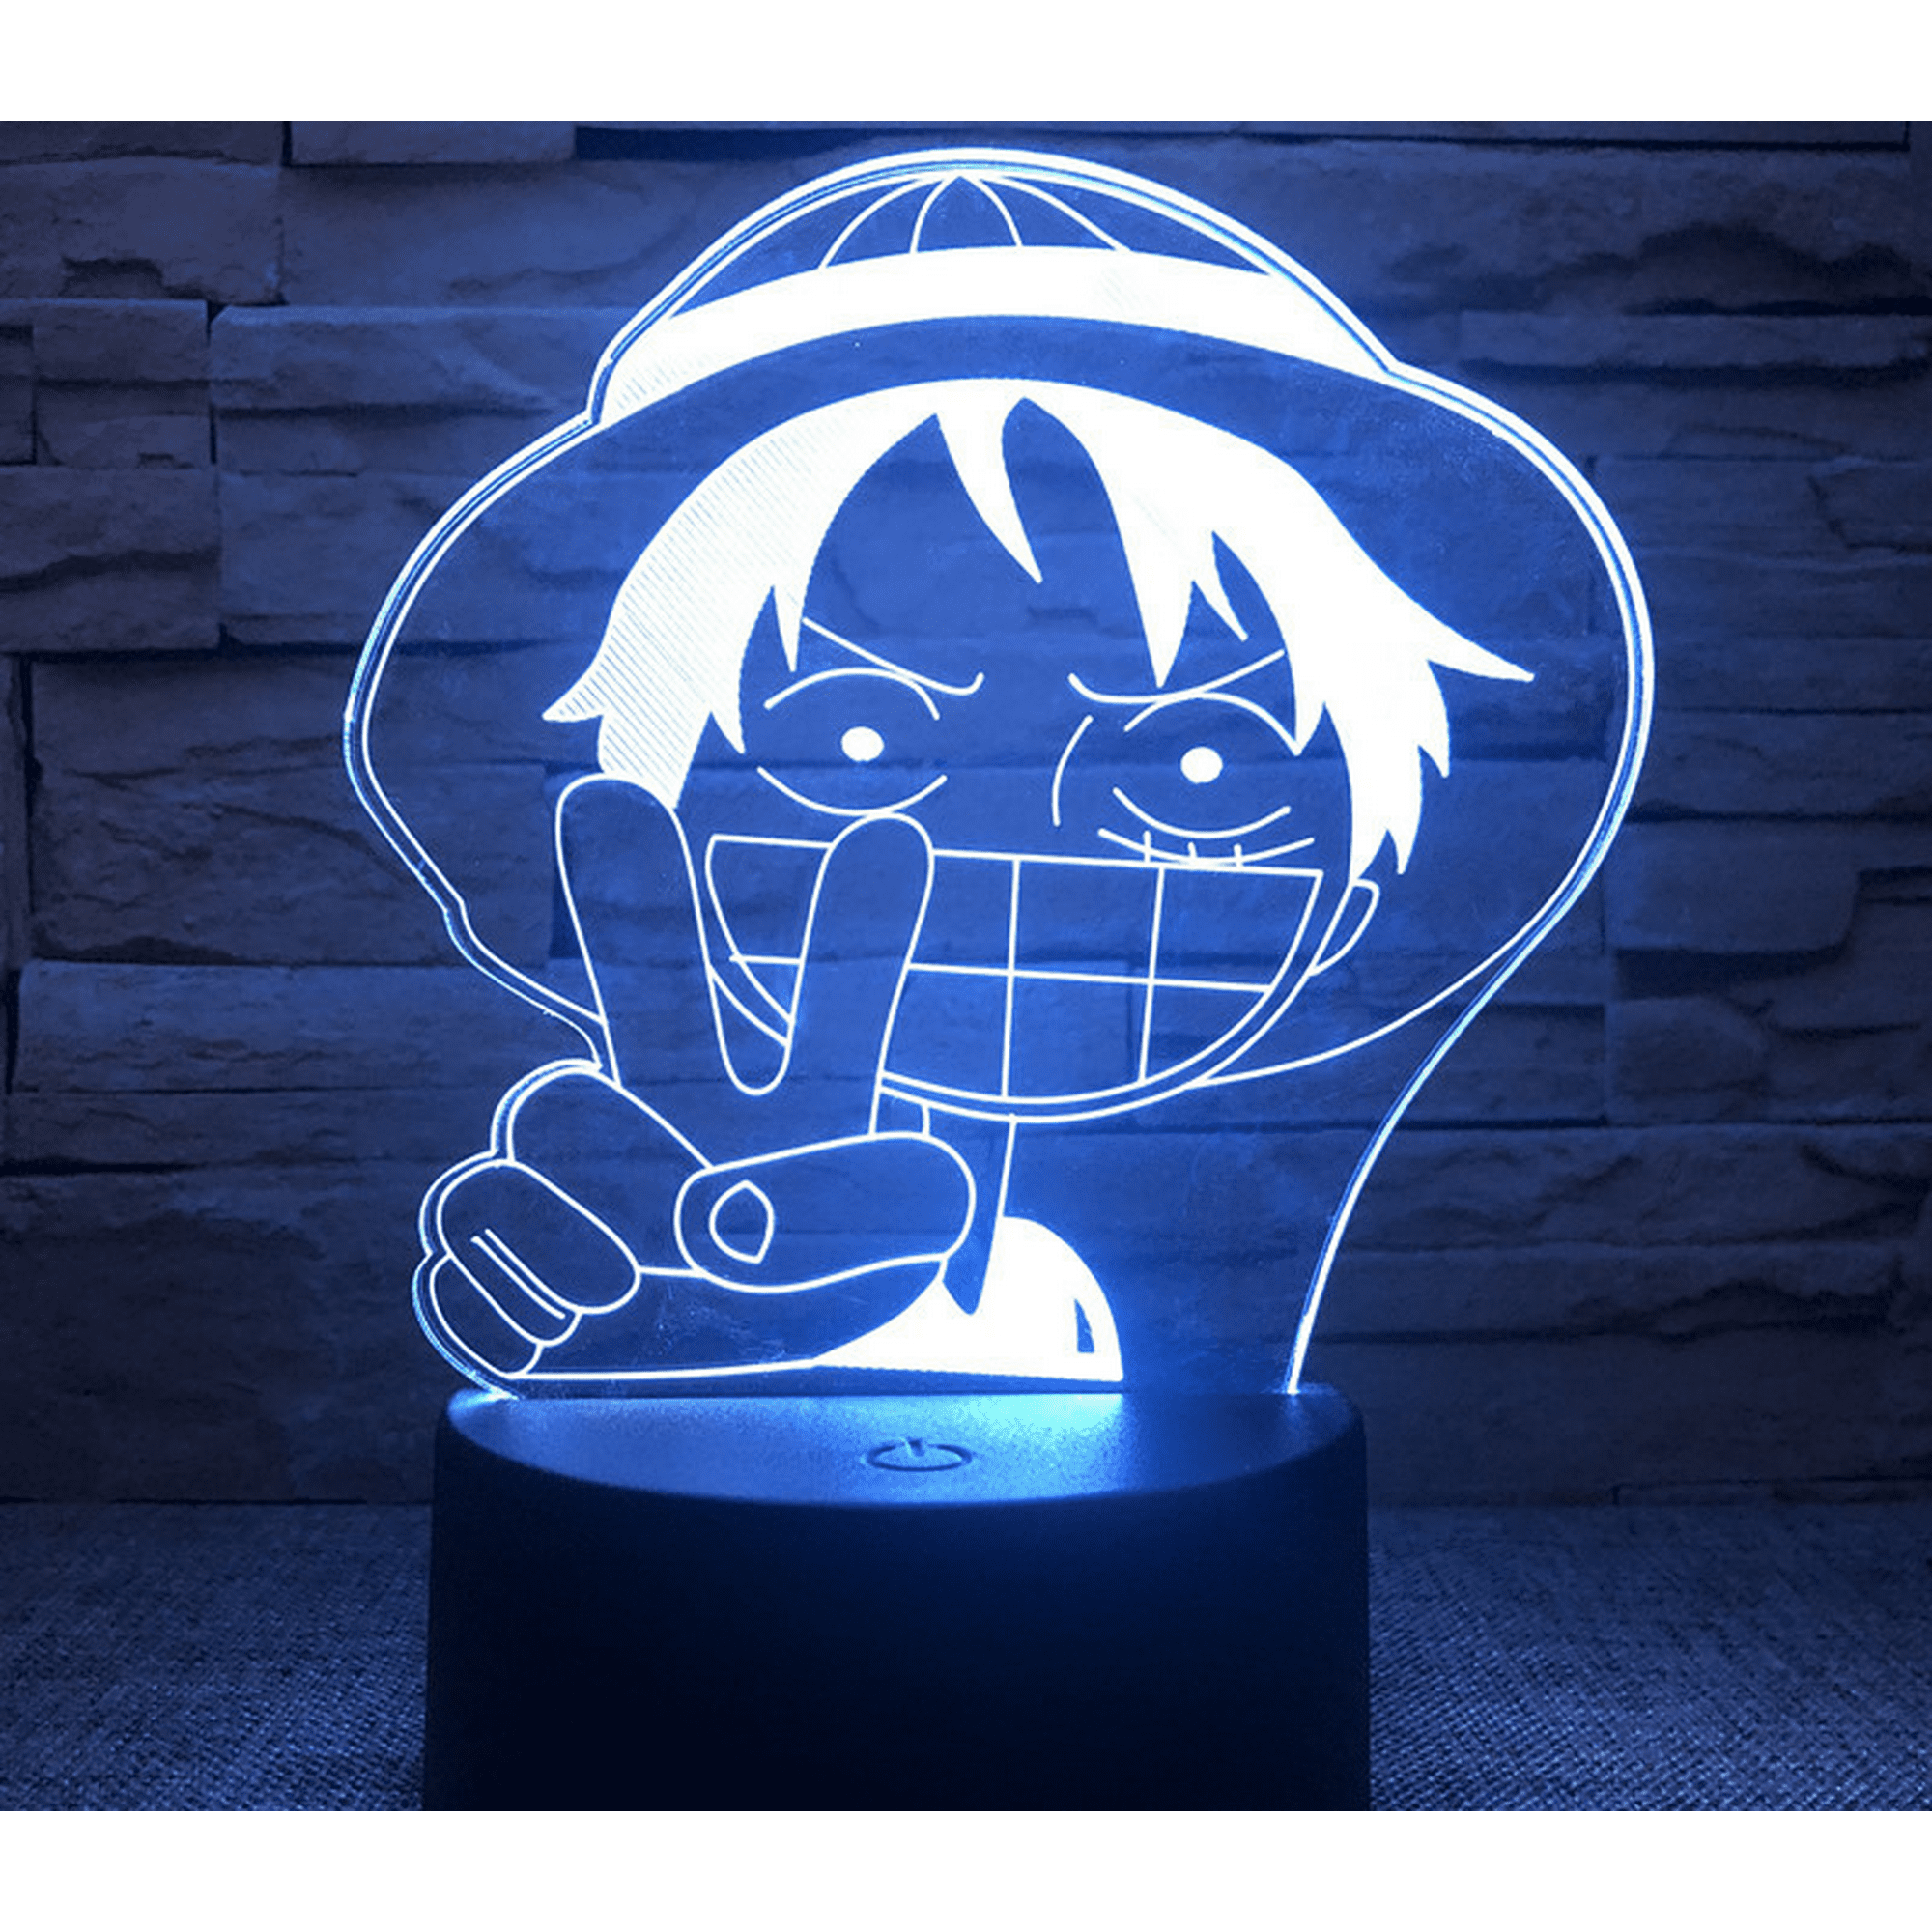 One Piece Anime Series Touch Remote Control Creative 3D Night Light Bedside  Lamp K usb Touch Remote Control 16 Colors | Walmart Canada